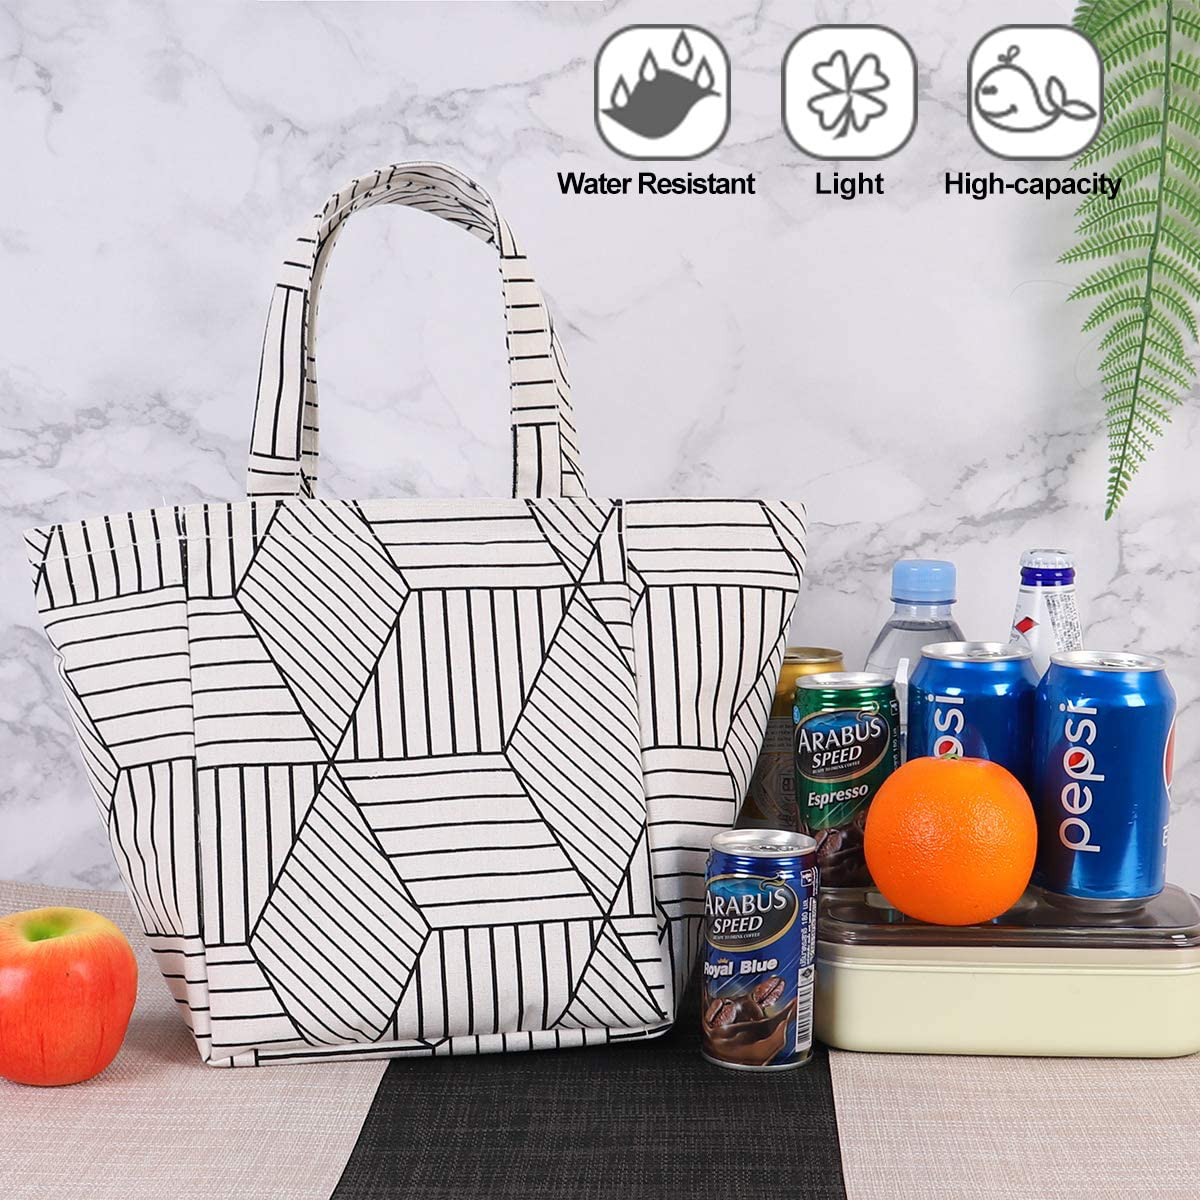 Buringer Insulated Lunch Bag with Inner Pocket Printed Canvas Fabric Reusable Cooler Tote Box for Ladies Woman Man School Work Picnic (Upgraded Gray Geometric Pattern)